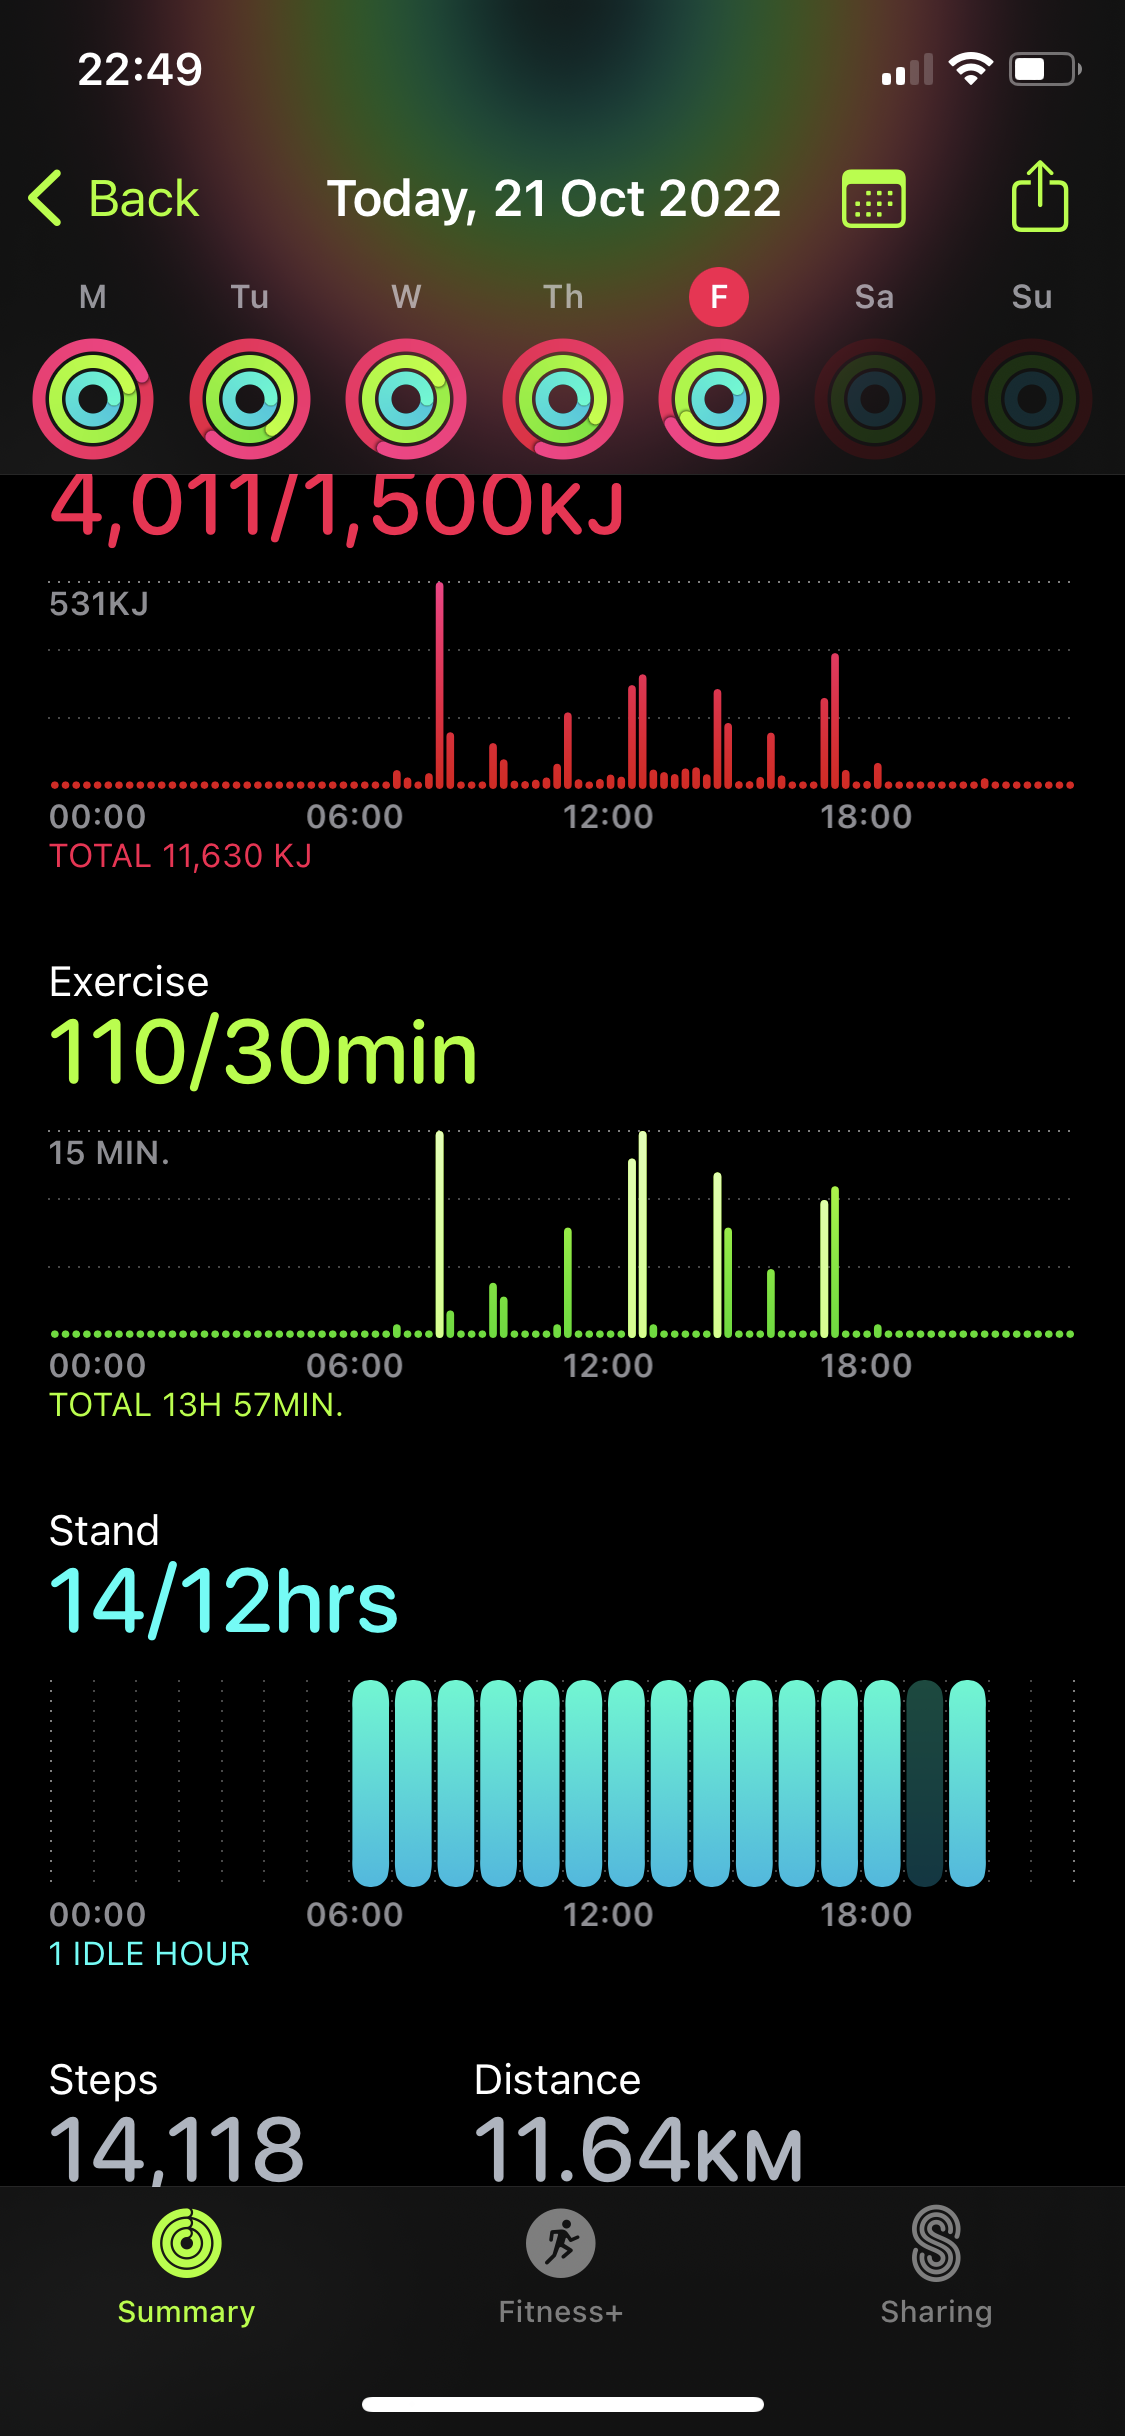 A screenshot of the iOS Fitness app showing 4011kJ out of the 1500kJ move goal, 110 minutes out of the 30 minute exercise goal, and a total of 14,118 steps.